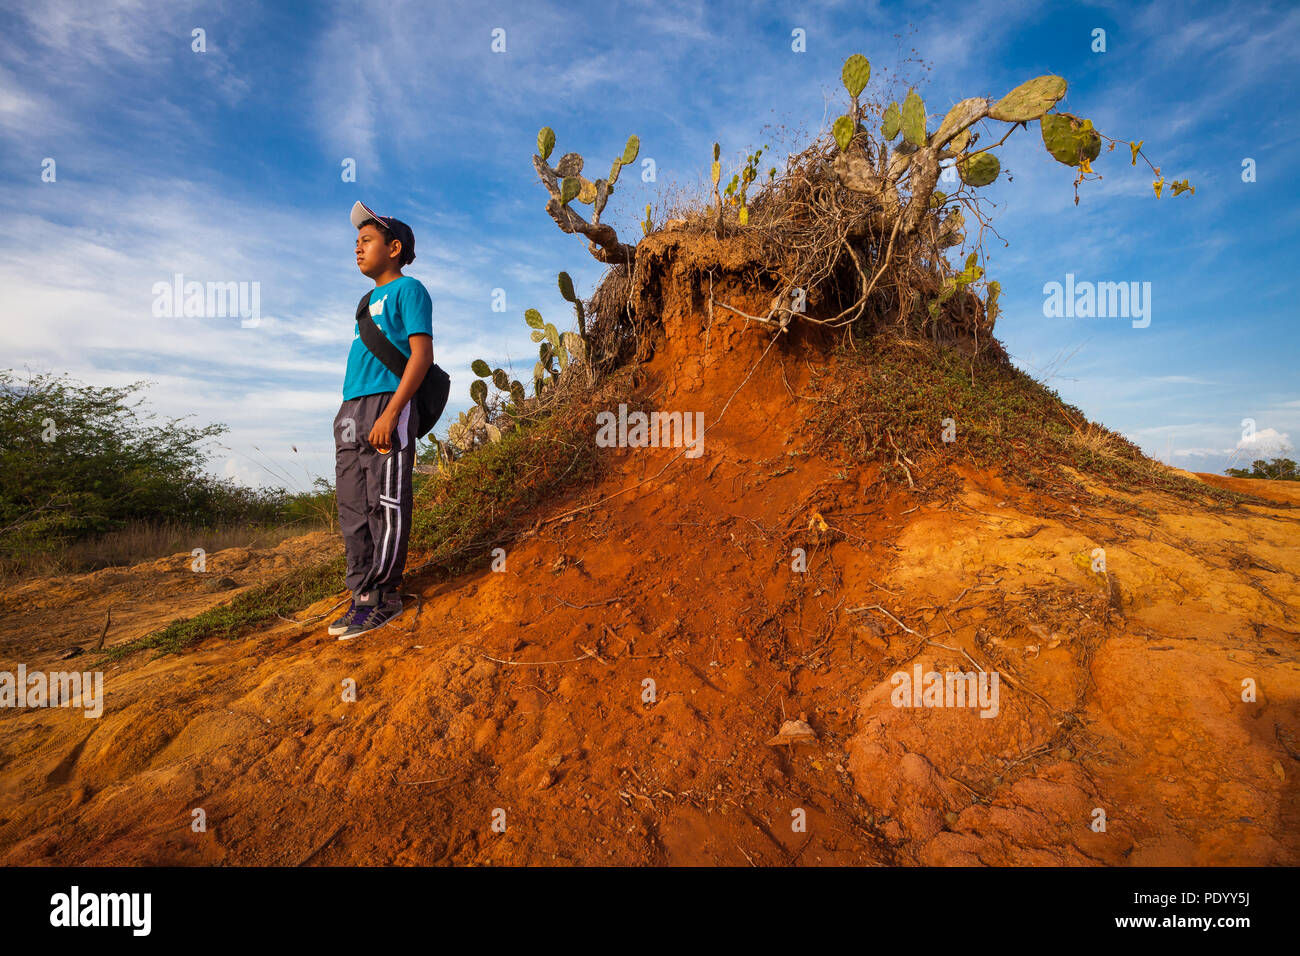 Young panamanian boy in the eroded landscape in the Sarigua national park (desert) in the Herrera province, Republic of Panama. Stock Photo